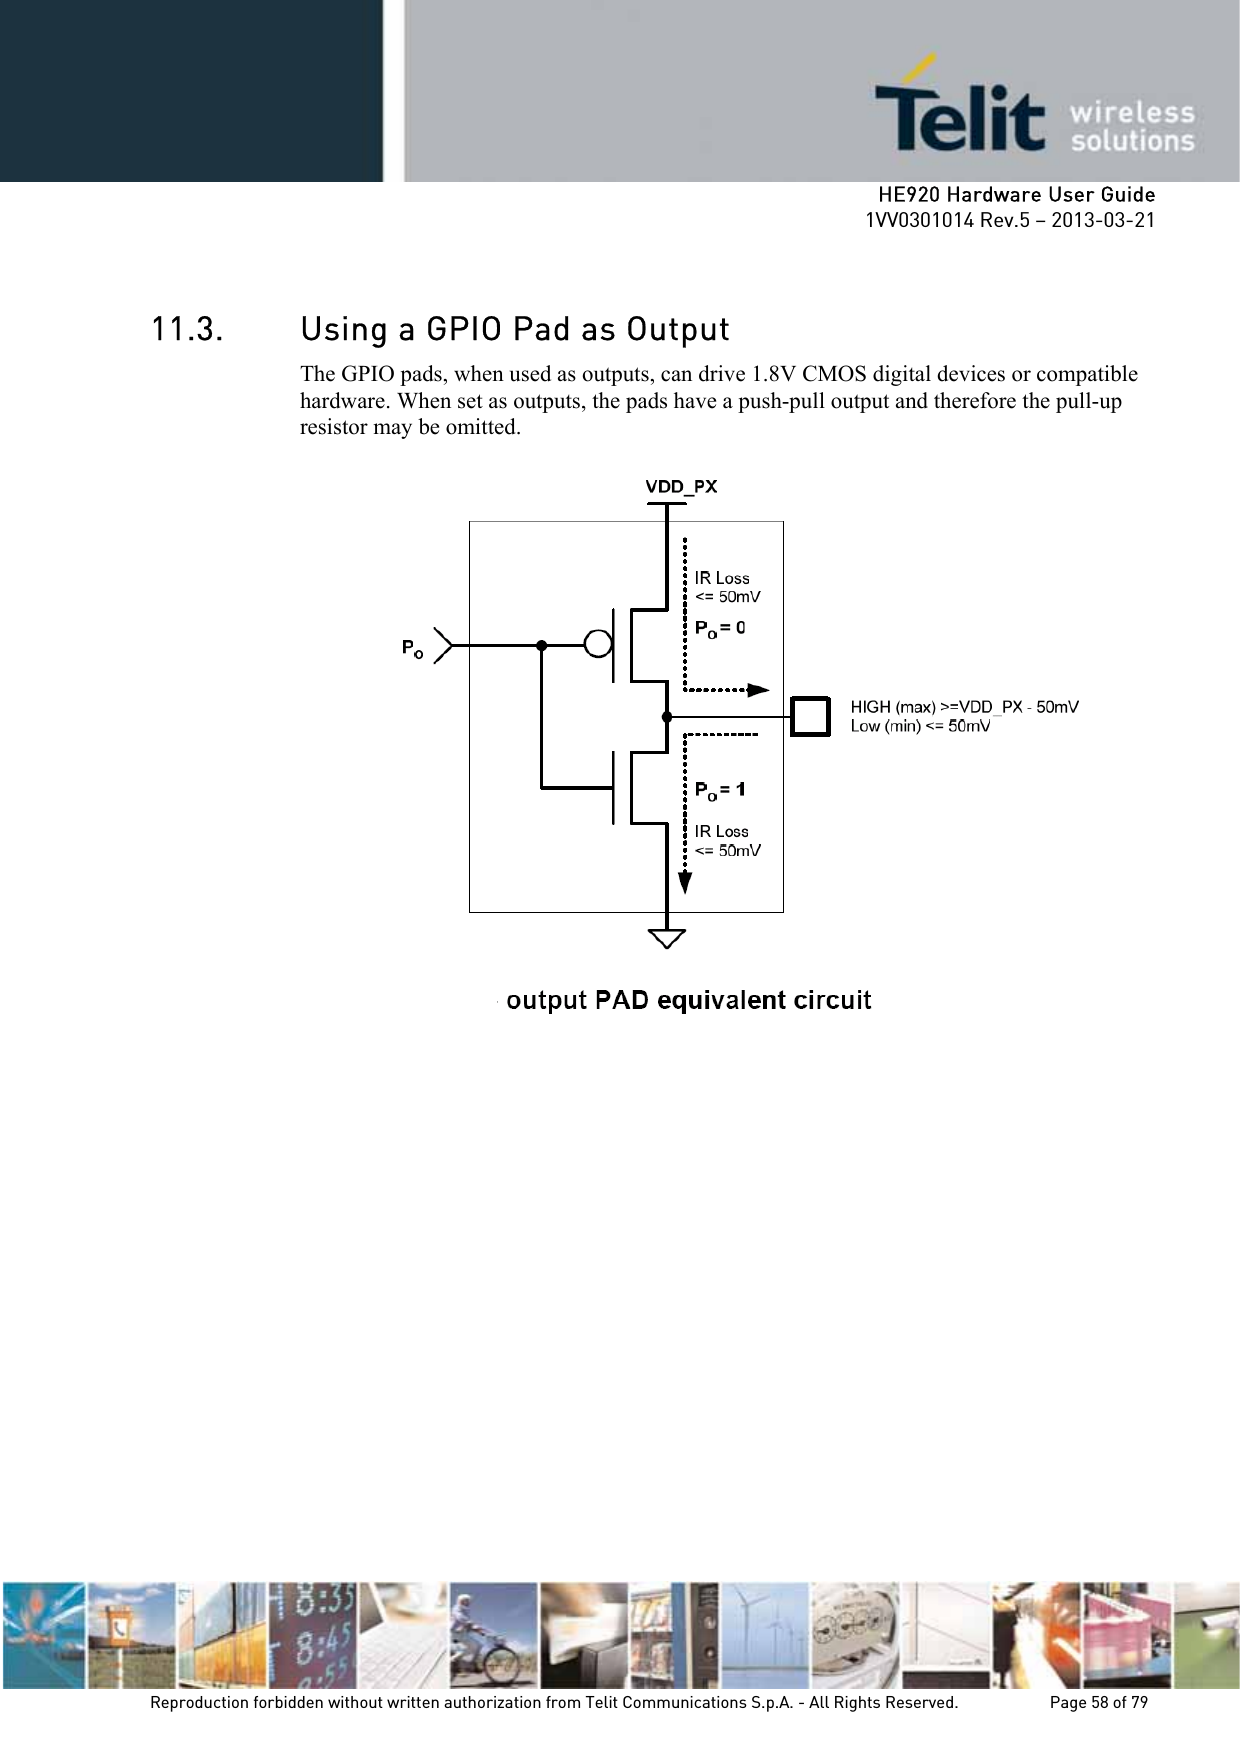     HE920 Hardware User Guide 1VV0301014 Rev.5 – 2013-03-21 Reproduction forbidden without written authorization from Telit Communications S.p.A. - All Rights Reserved.    Page 58 of 79   11.3. Using a GPIO Pad as Output The GPIO pads, when used as outputs, can drive 1.8V CMOS digital devices or compatible hardware. When set as outputs, the pads have a push-pull output and therefore the pull-up resistor may be omitted.  